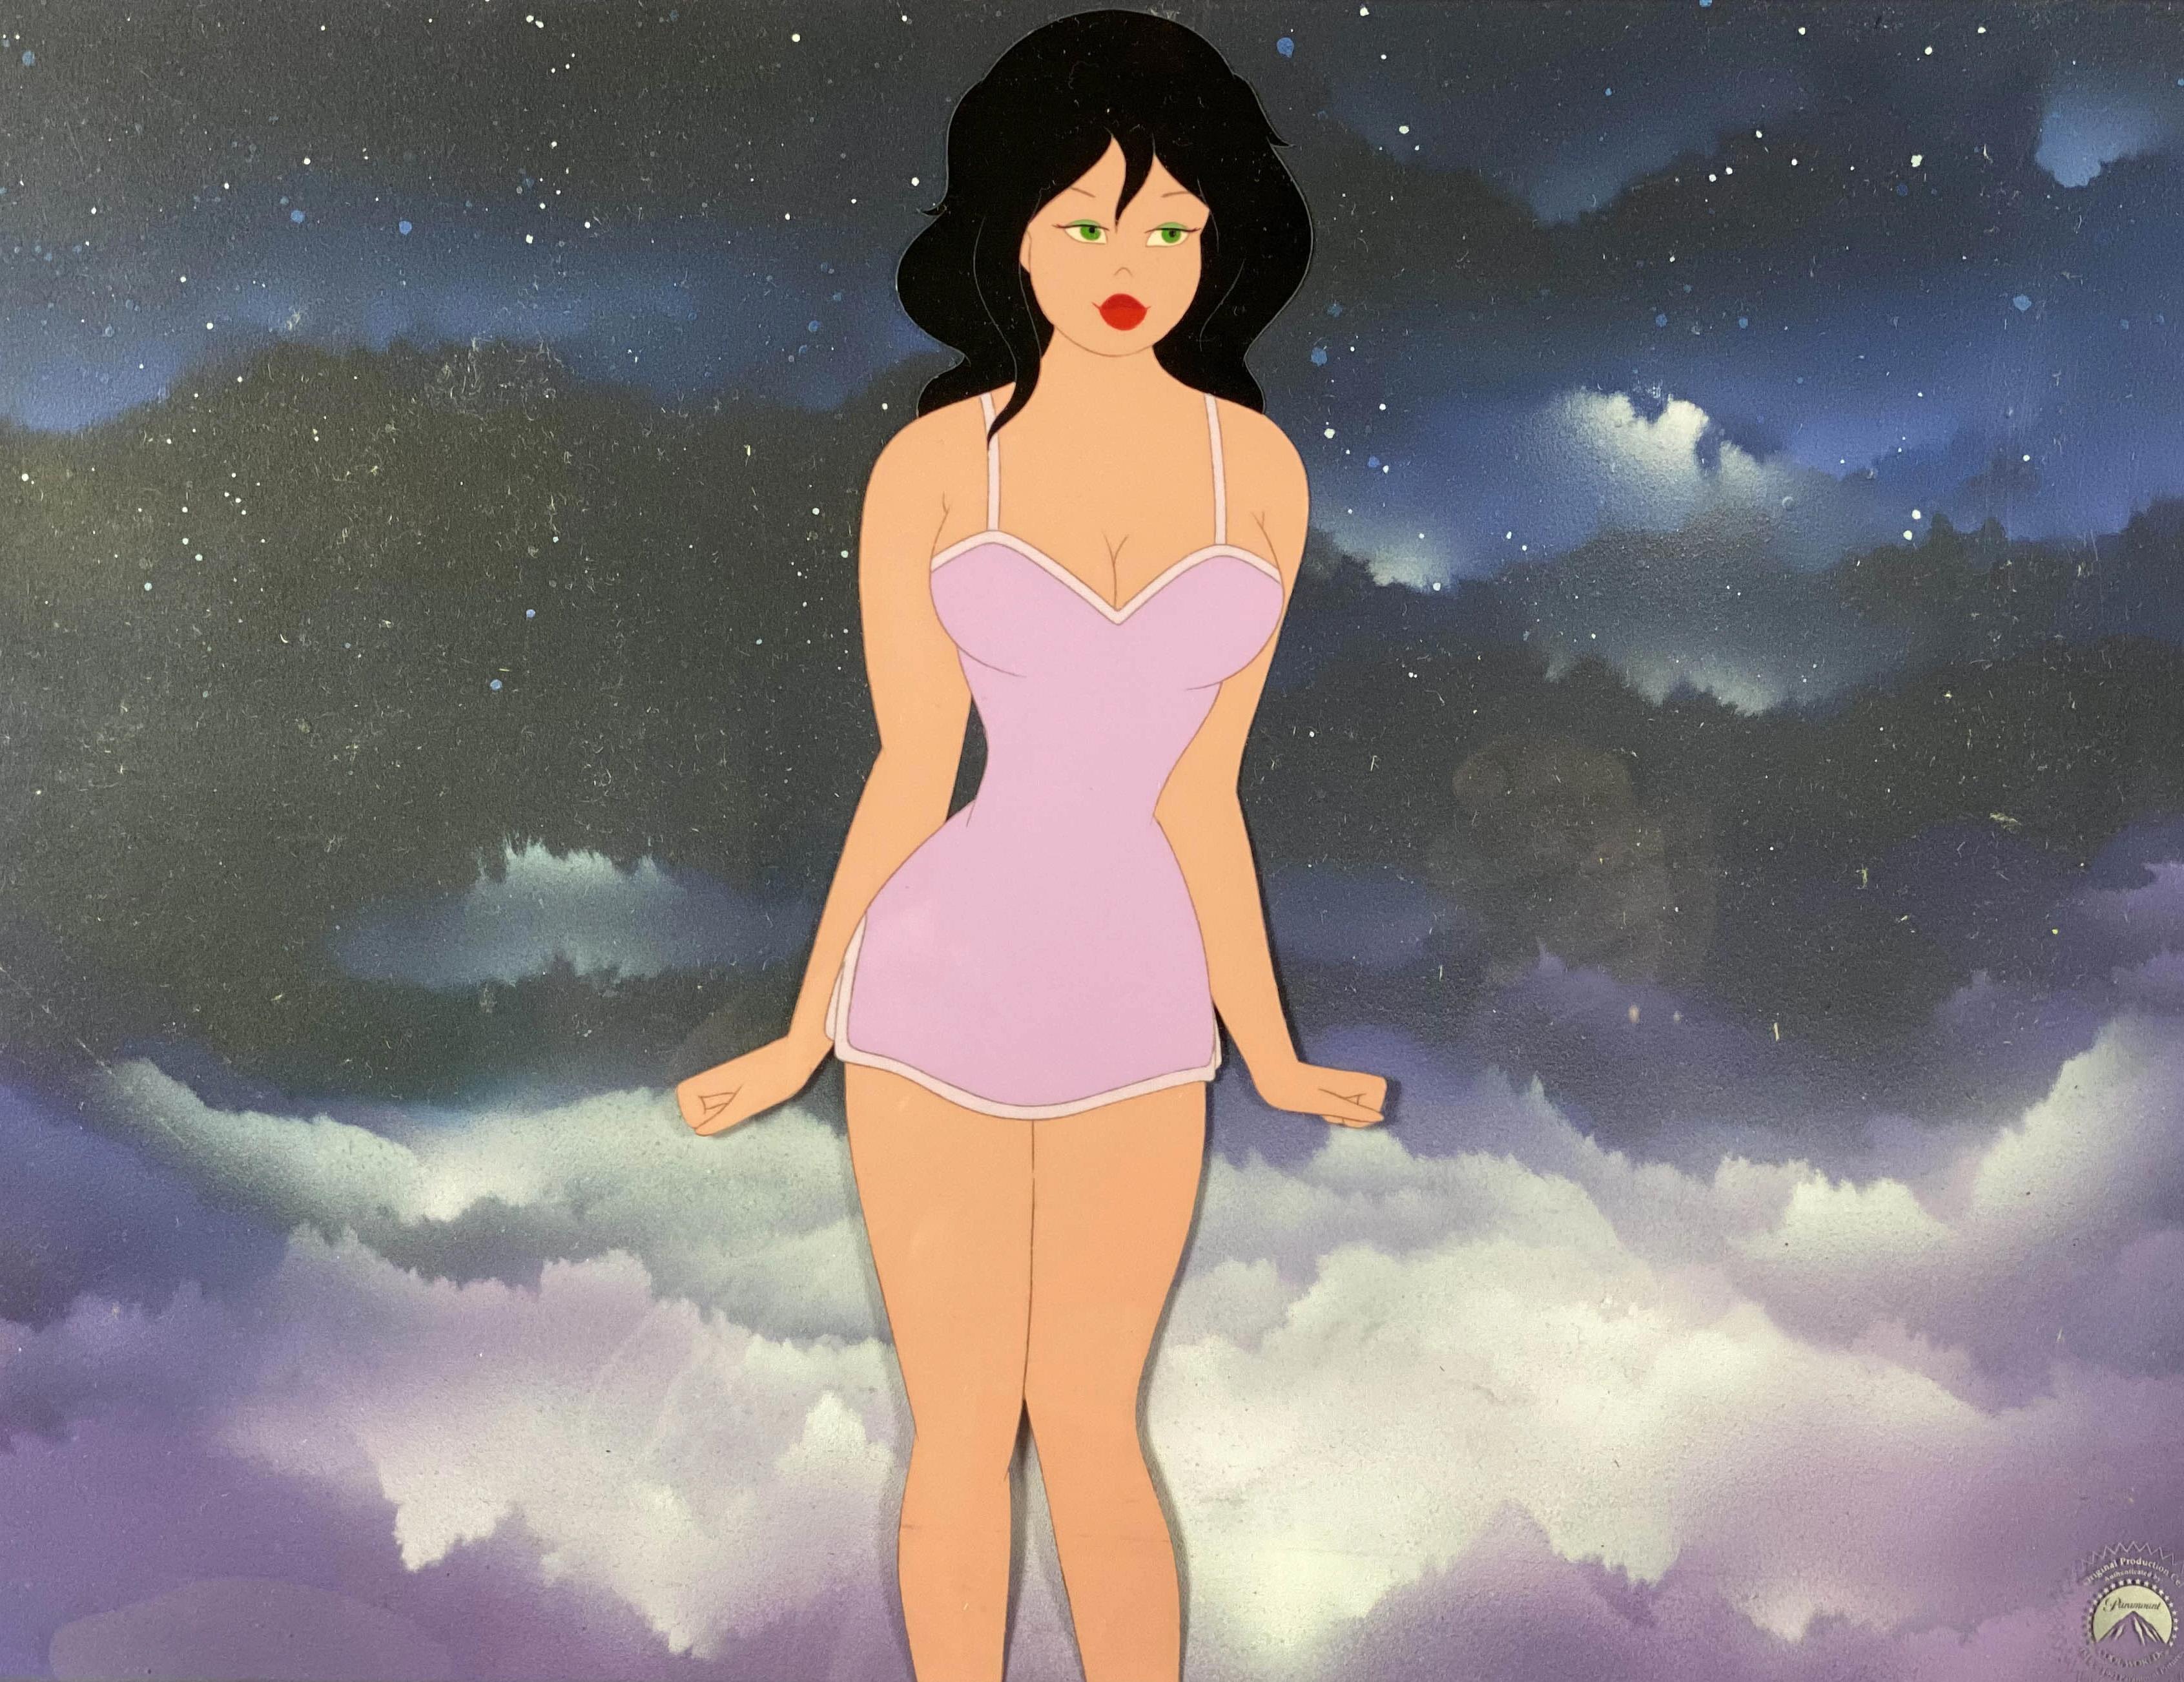 An excellent full colour multi-layered original production cel of an animated character from the film 'Cool World'. Authenticated by Paramount and dated 1992.

Original production cels are one-of-a-kind pieces of art that were used in the creation